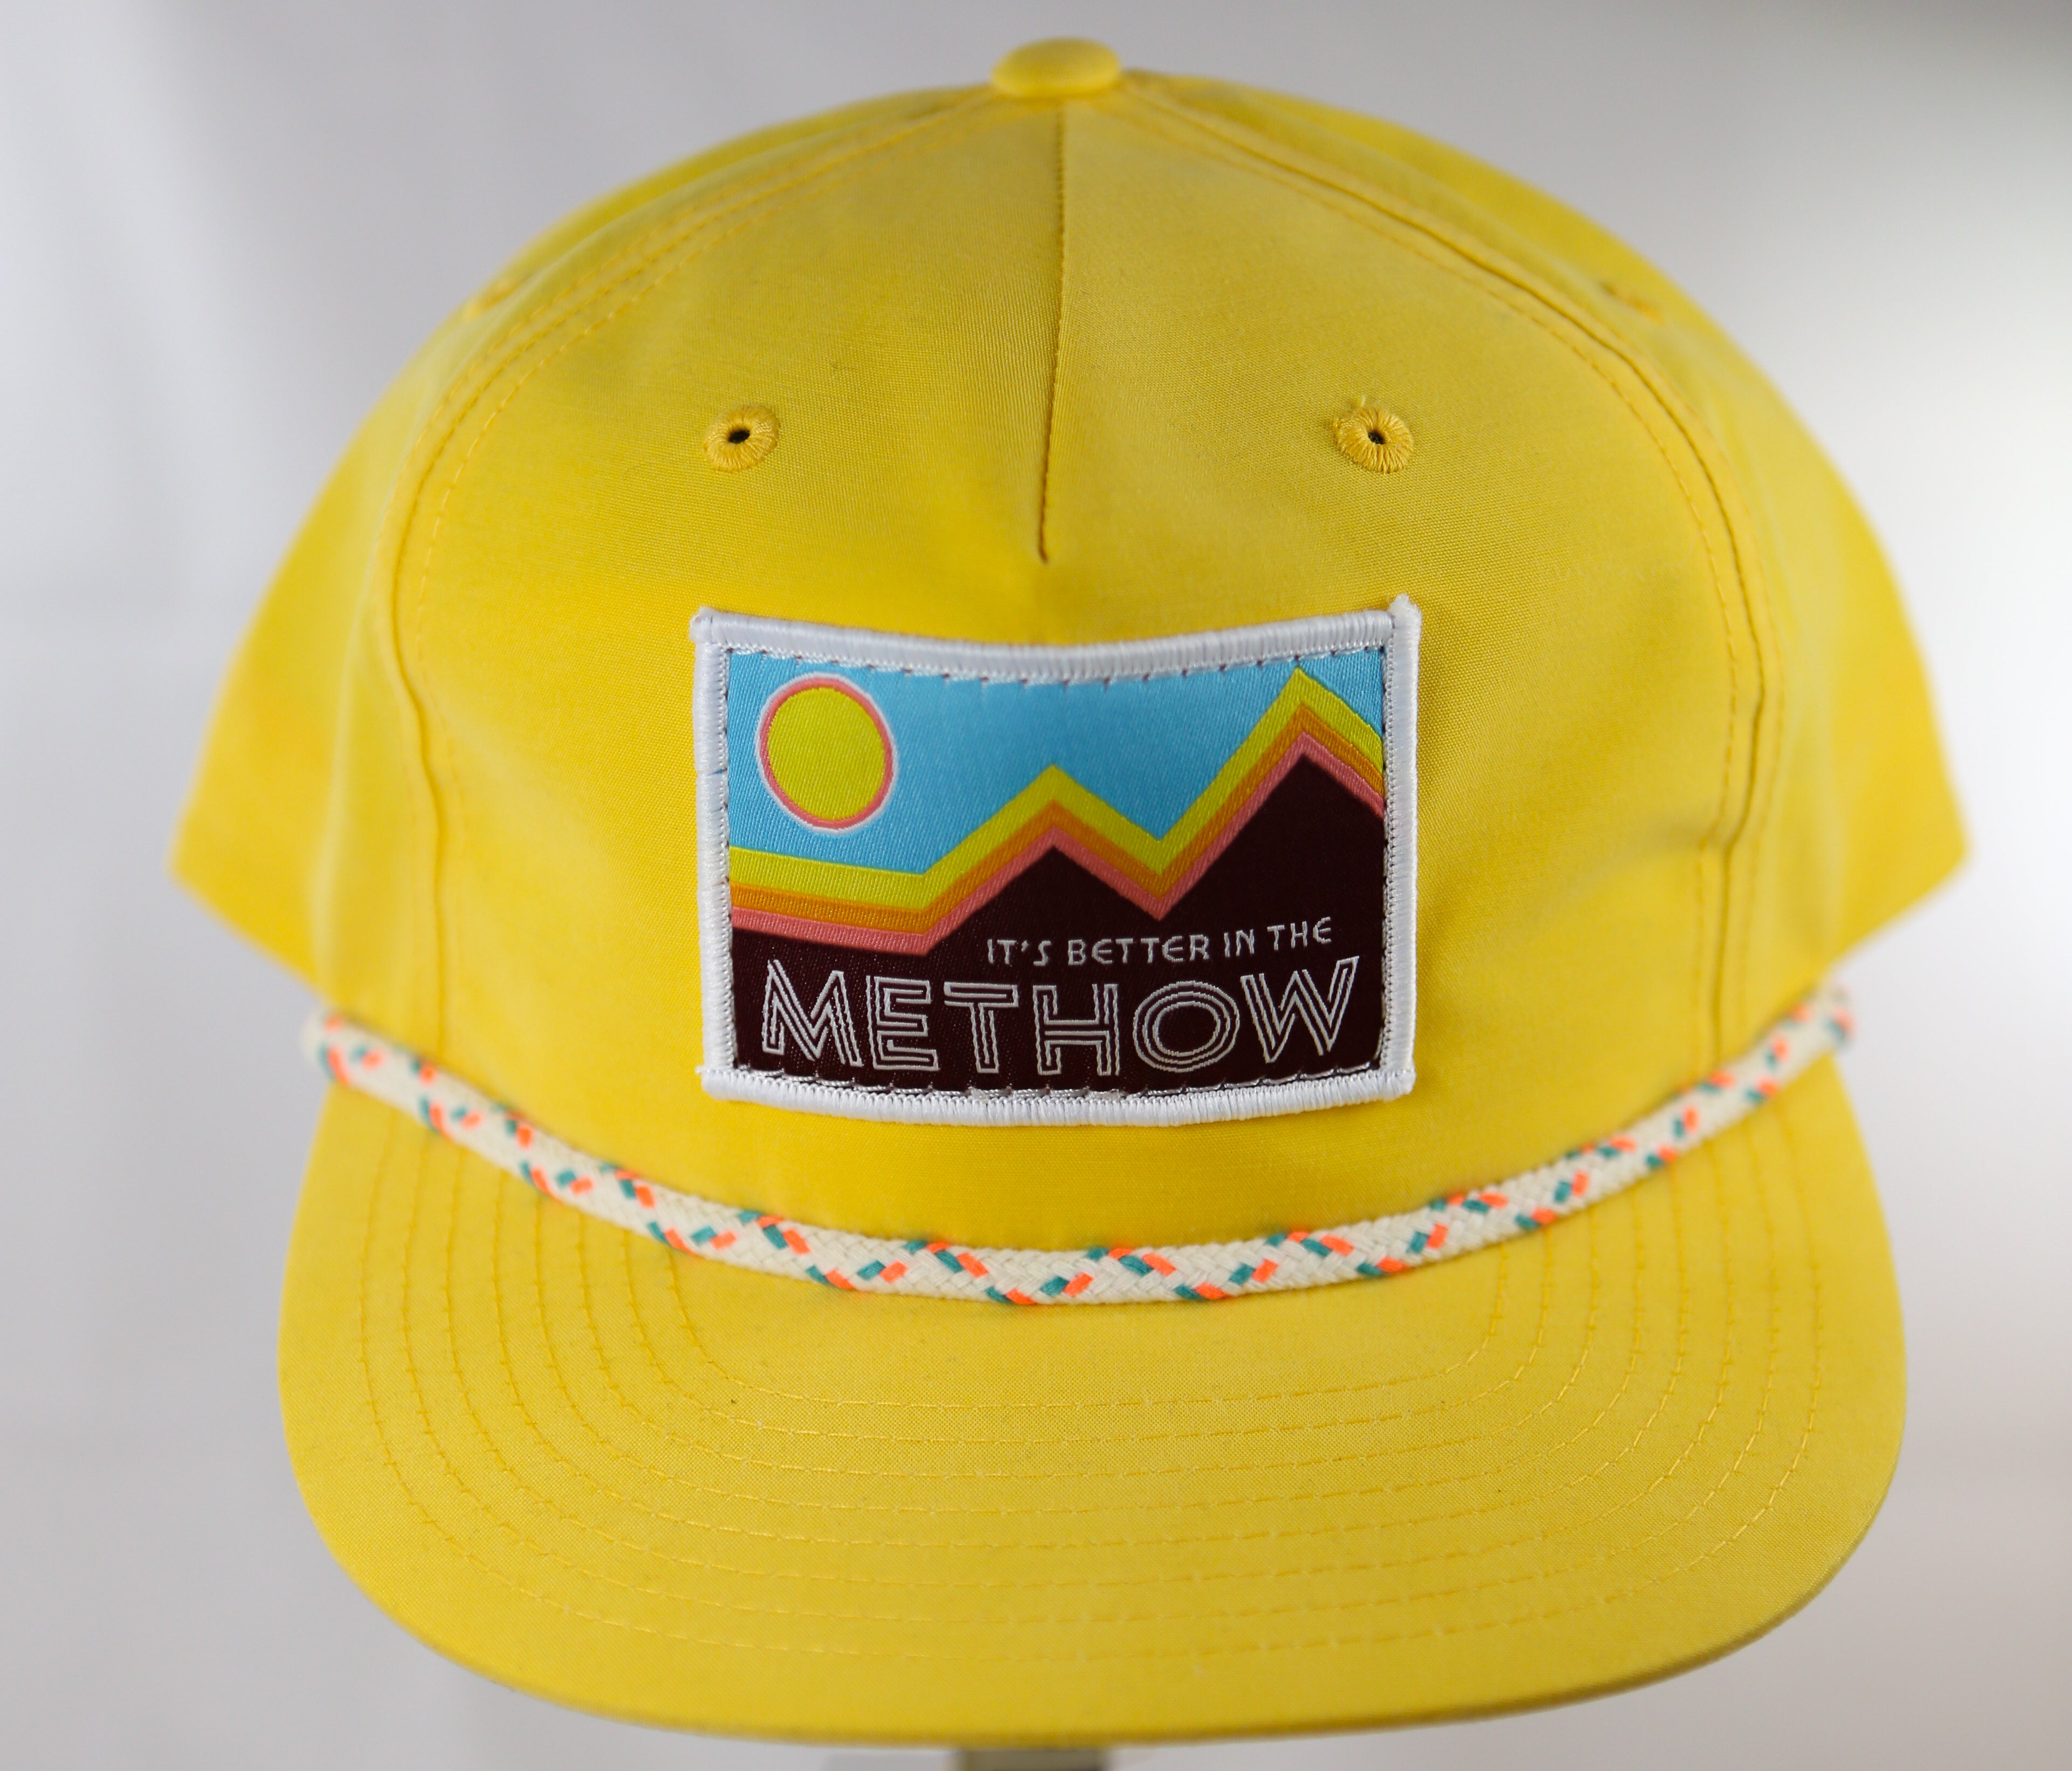 It's Better in the Methow - Gramps Snapback